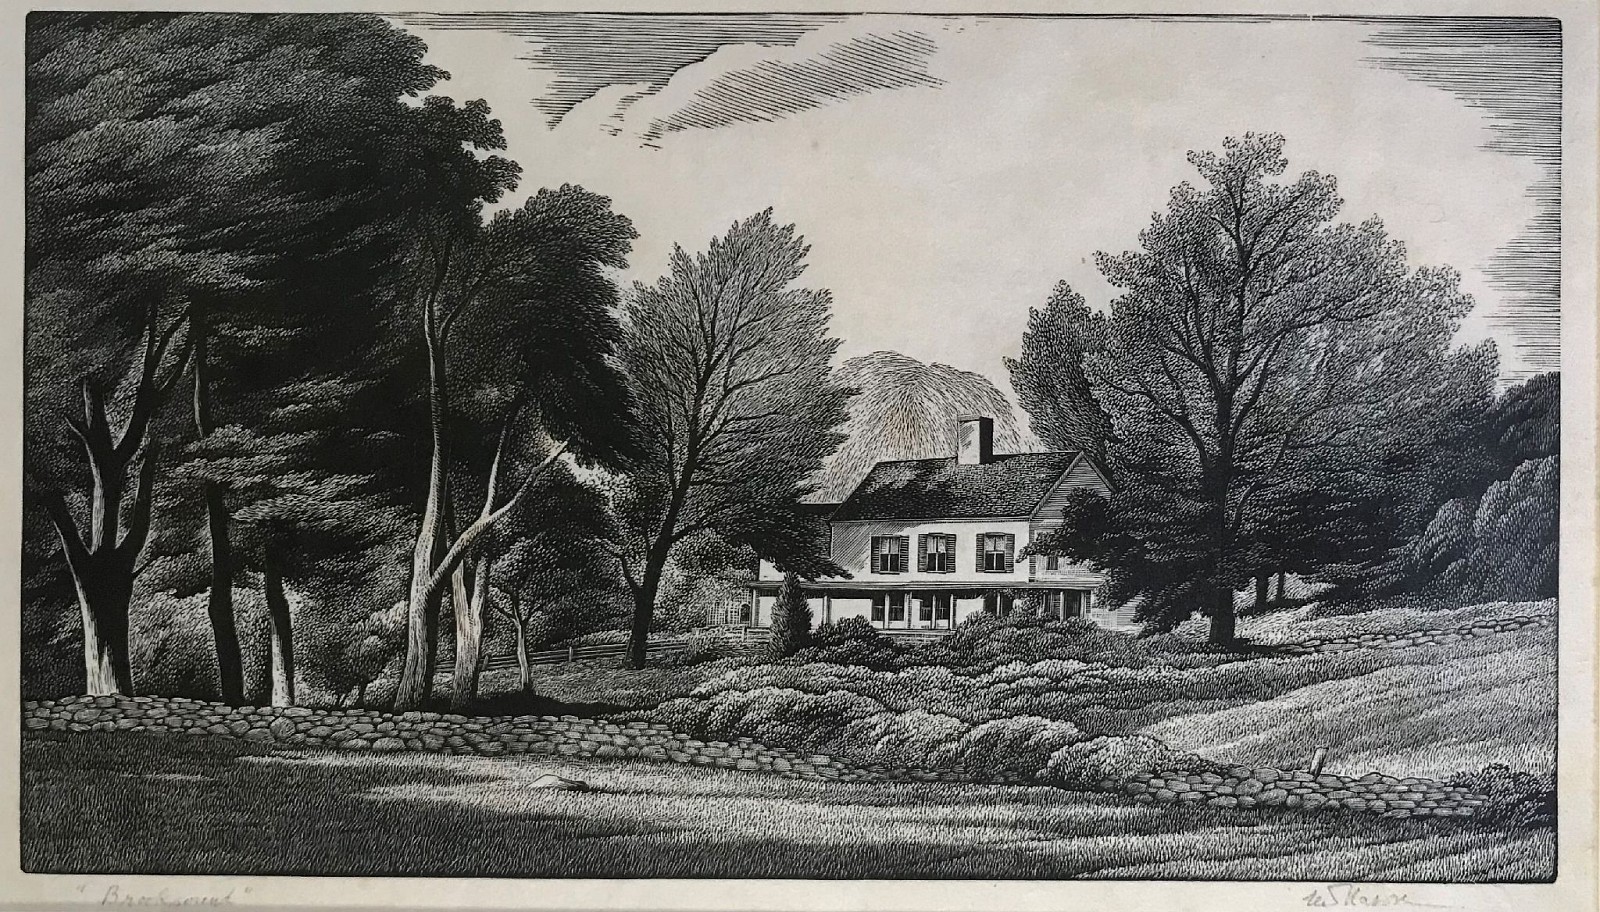 Thomas Willoughby Nason, Irvine's Place, Lyme, 1950
wood engraving on Japanese paper, edition of 60, 5 1/2"" x 9 3/4"" 

BPL #141
signed, TW Nason, lower right
inscribed "Brook Sound", lower left
THFA 05/17.21A
$850